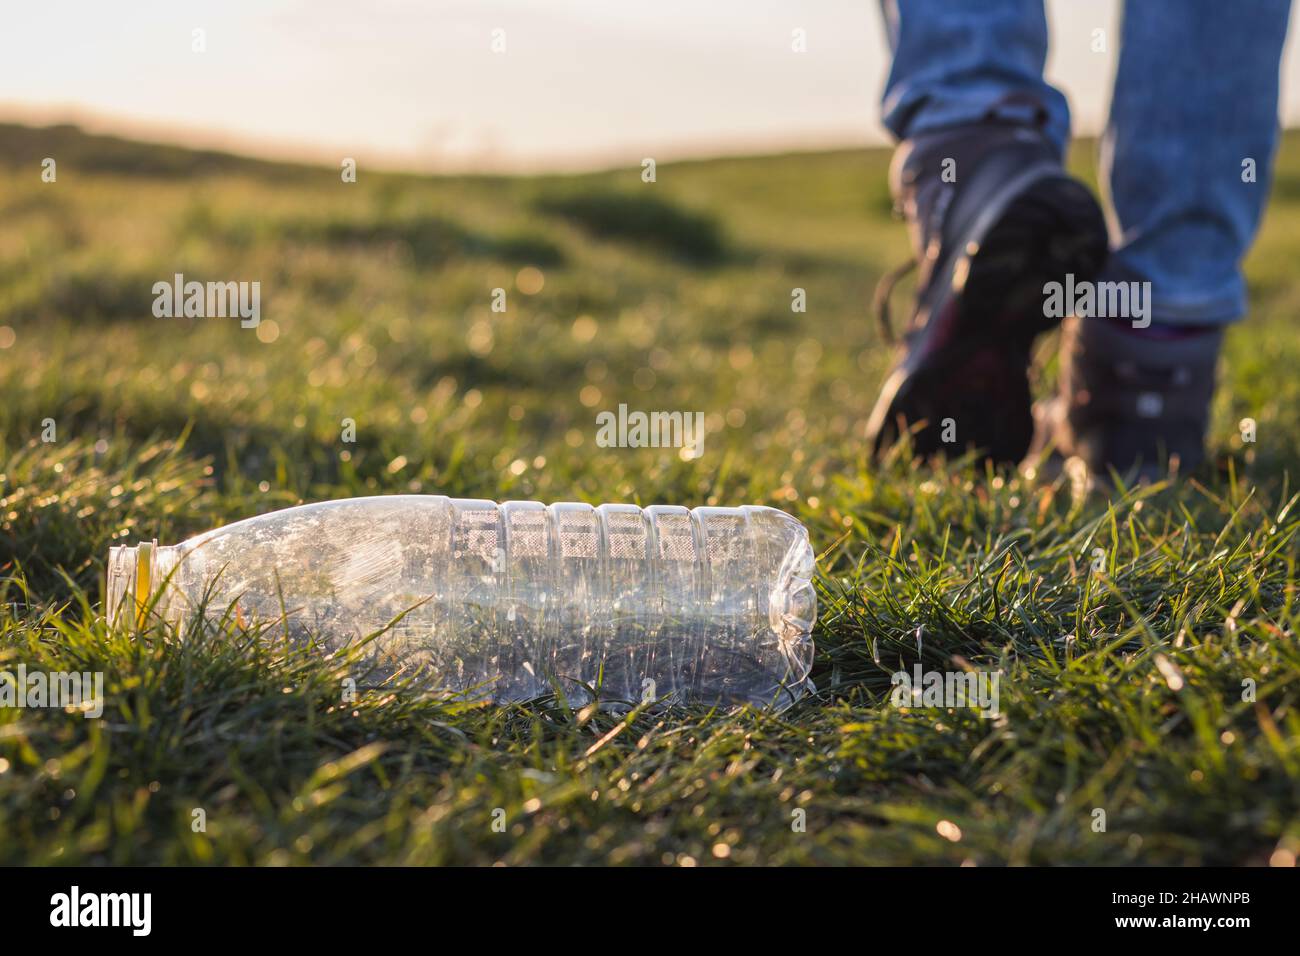 Irresponsible tourist leaving plastic bottle outdoors. Plastic pollution concept. Environmental damage in nature Stock Photo